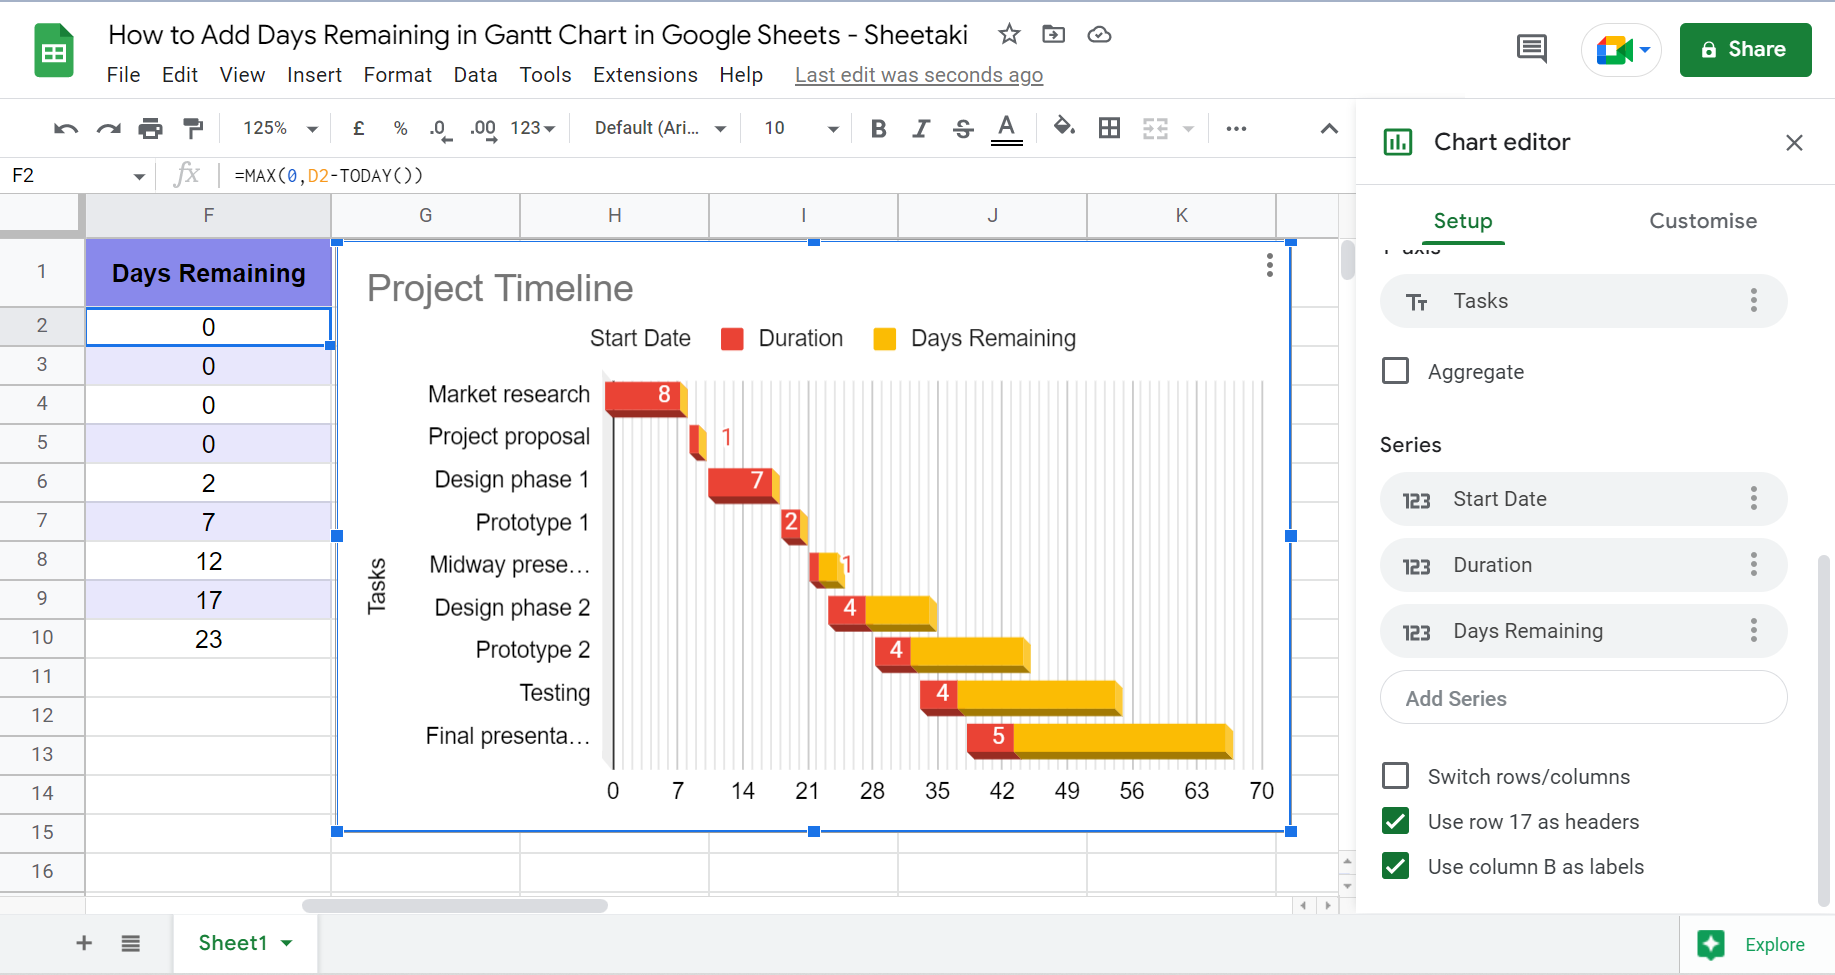 Add Days Remaining in Gantt Chart in Google Sheets